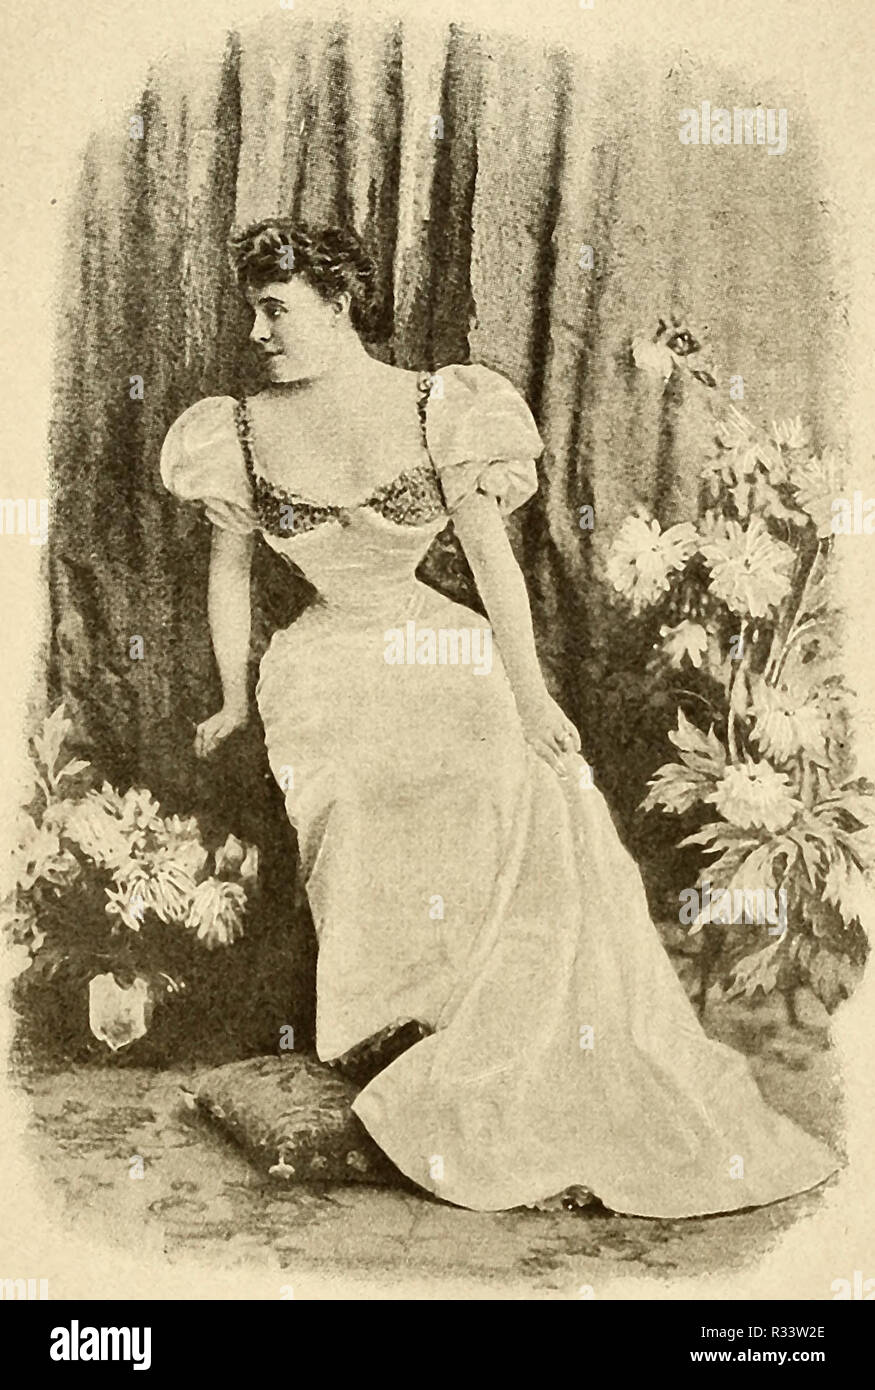 Sibyl Sanderson (December 7, 1864 - May 16, 1903) - a famous American operatic soprano during the Parisian Belle Epoque Stock Photo